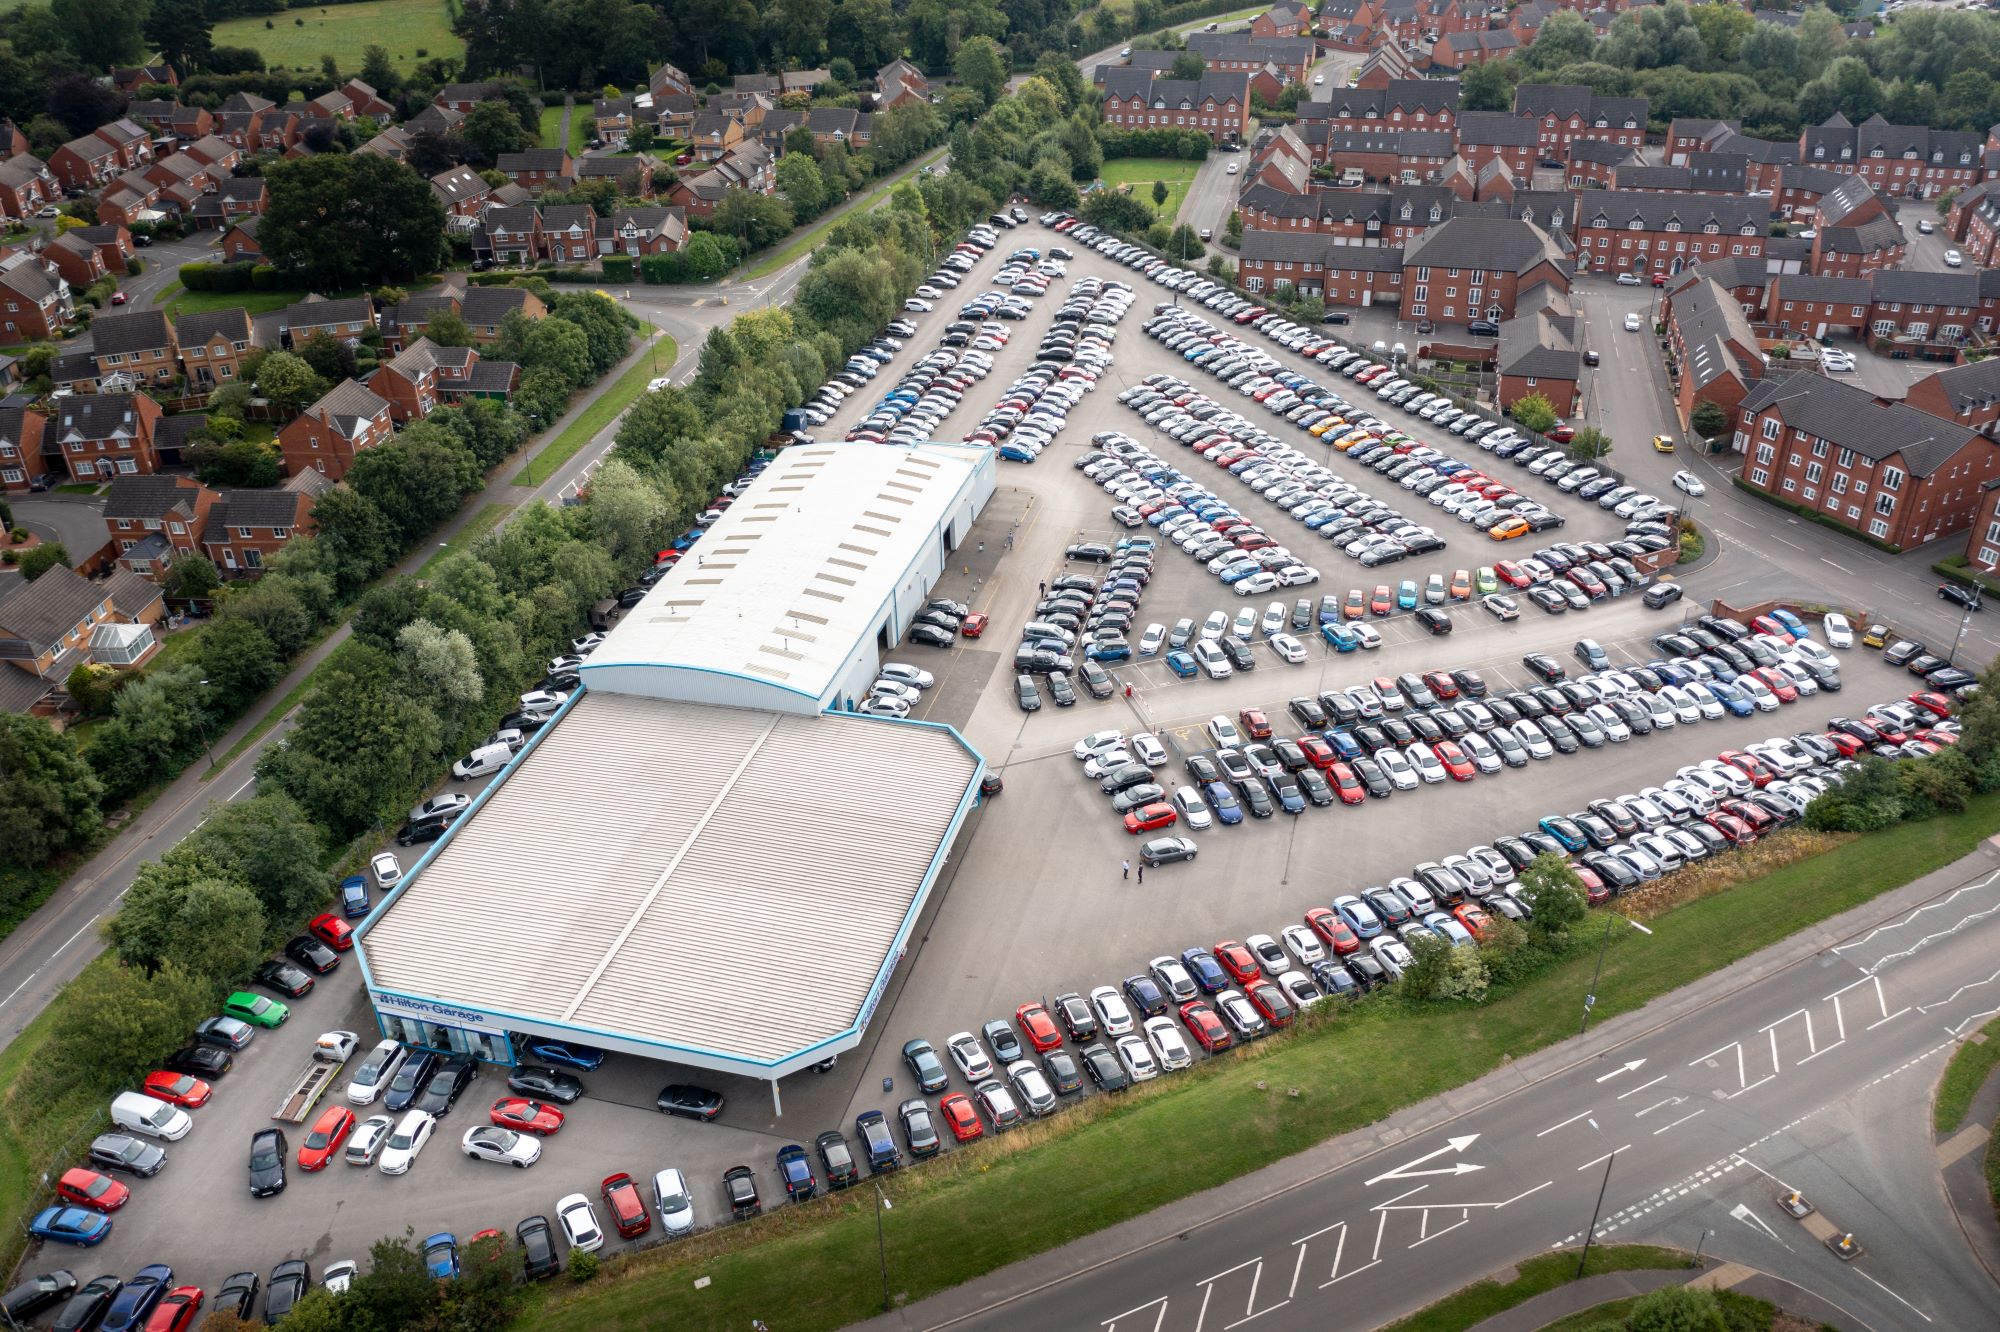 Hilton Garage becomes the latest used car supermarket to sign with Cox Automotive